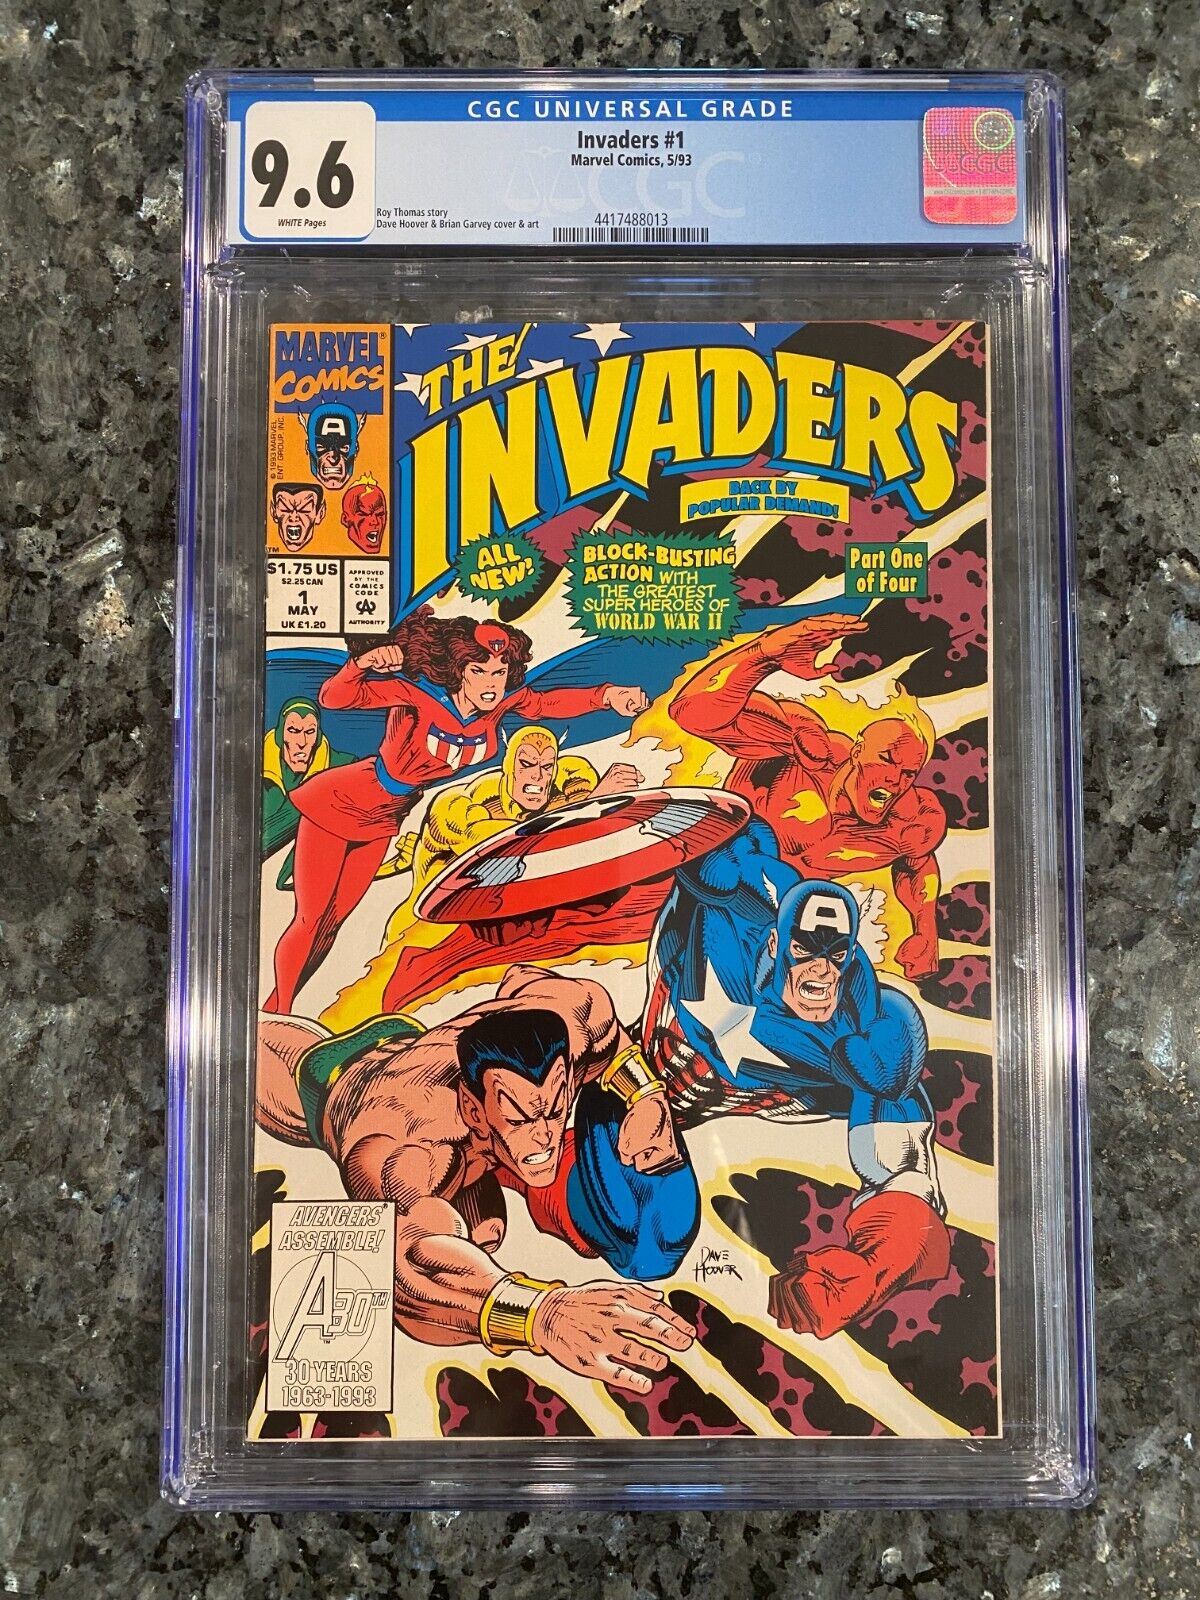 Classic Nostalgic Storytelling Superhero TeamUp: Invaders #1 CGC 9.6 White Pages